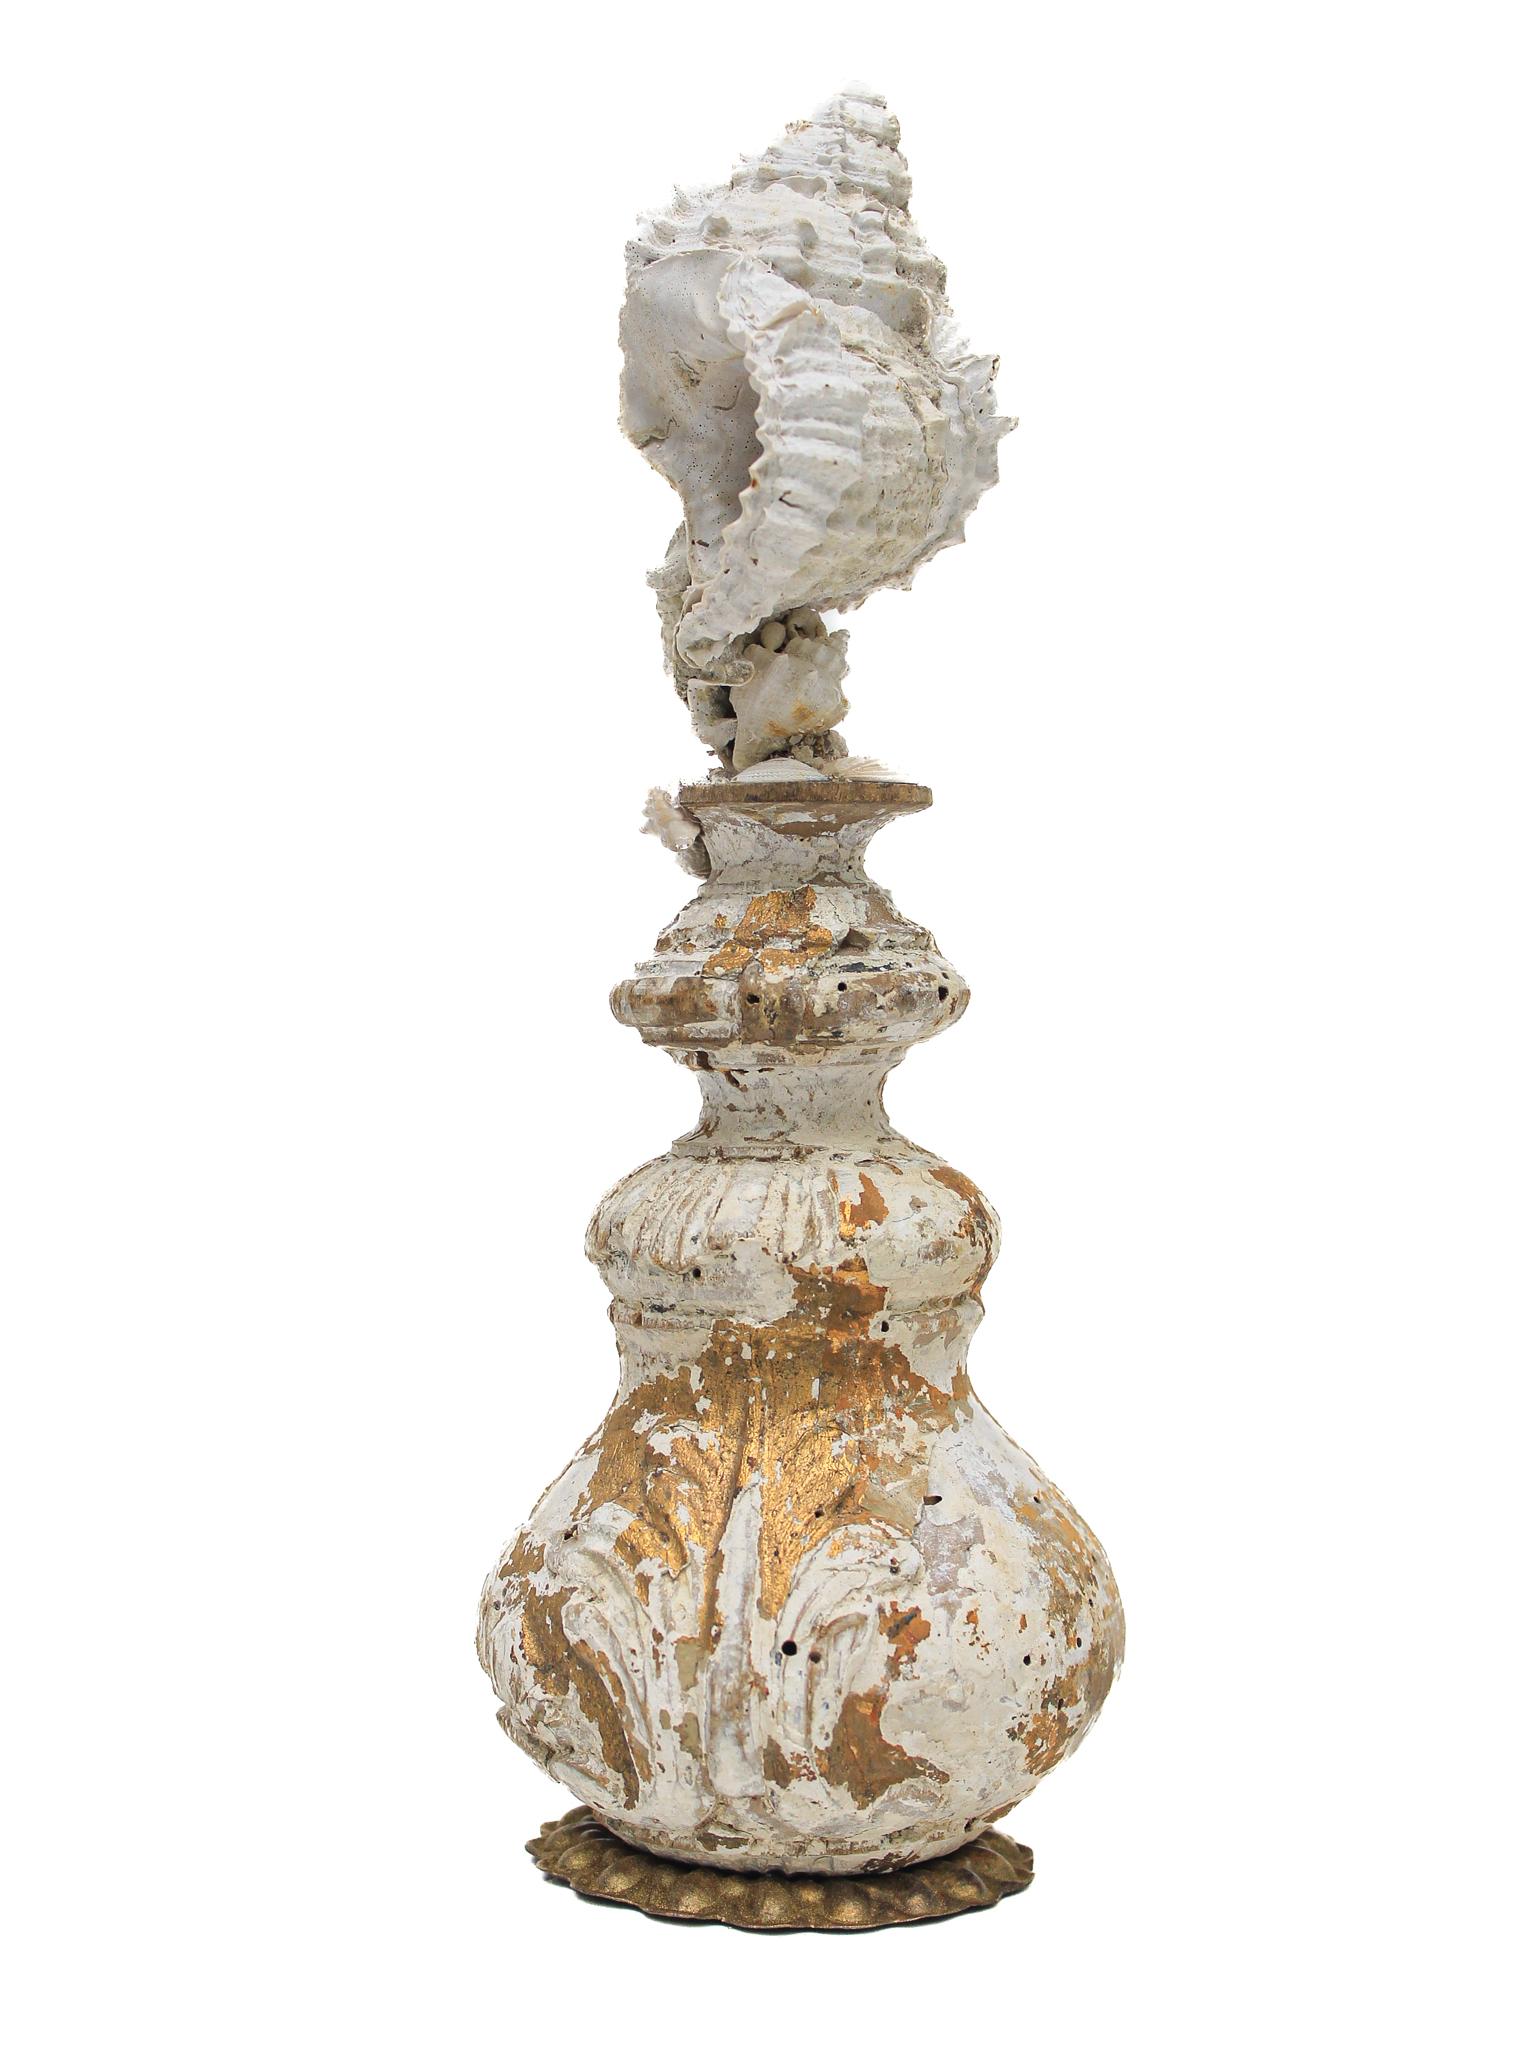 17th Century Italian Vase with a Hystrivasum Shell on an Antique Metal Stand 1